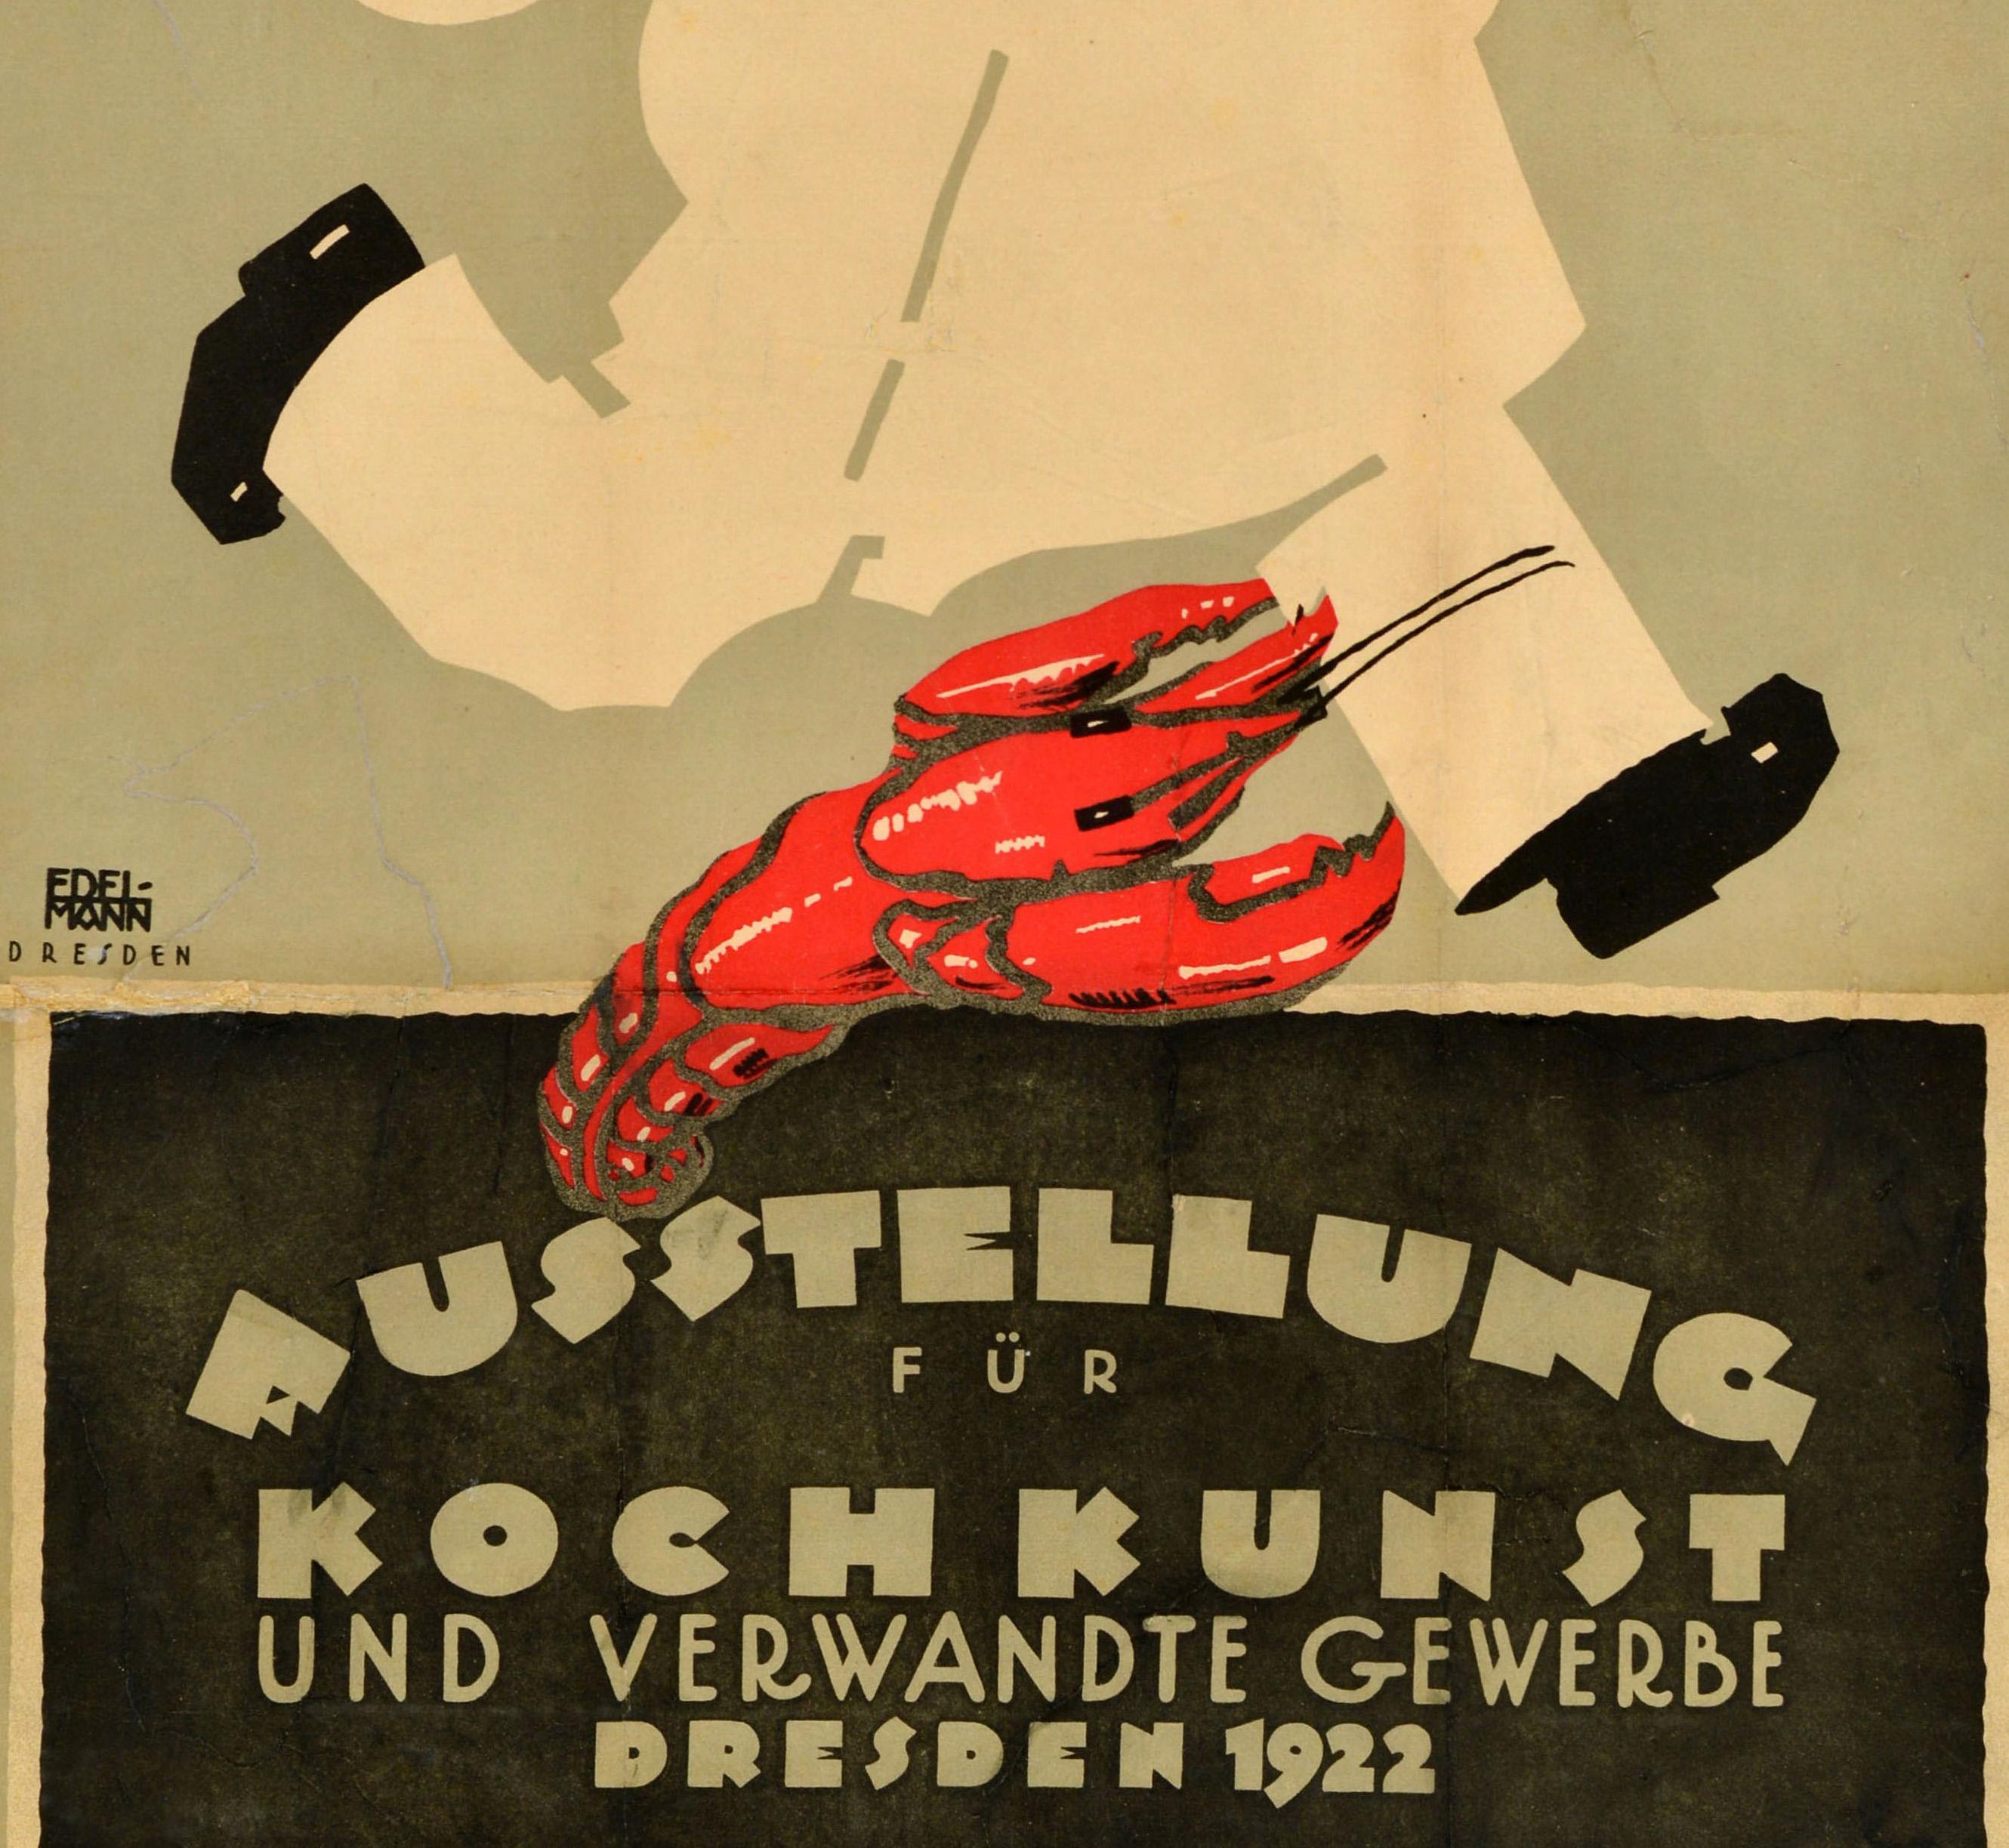 Original antique cooking event advertising poster - Austellung fur Kochskunst und Verwandte Gewerbe Dresden 1922 / Exhibition for Culinary Arts and Related Trades 25 to 18 March - featuring a great design depicting a chef running while holding up a